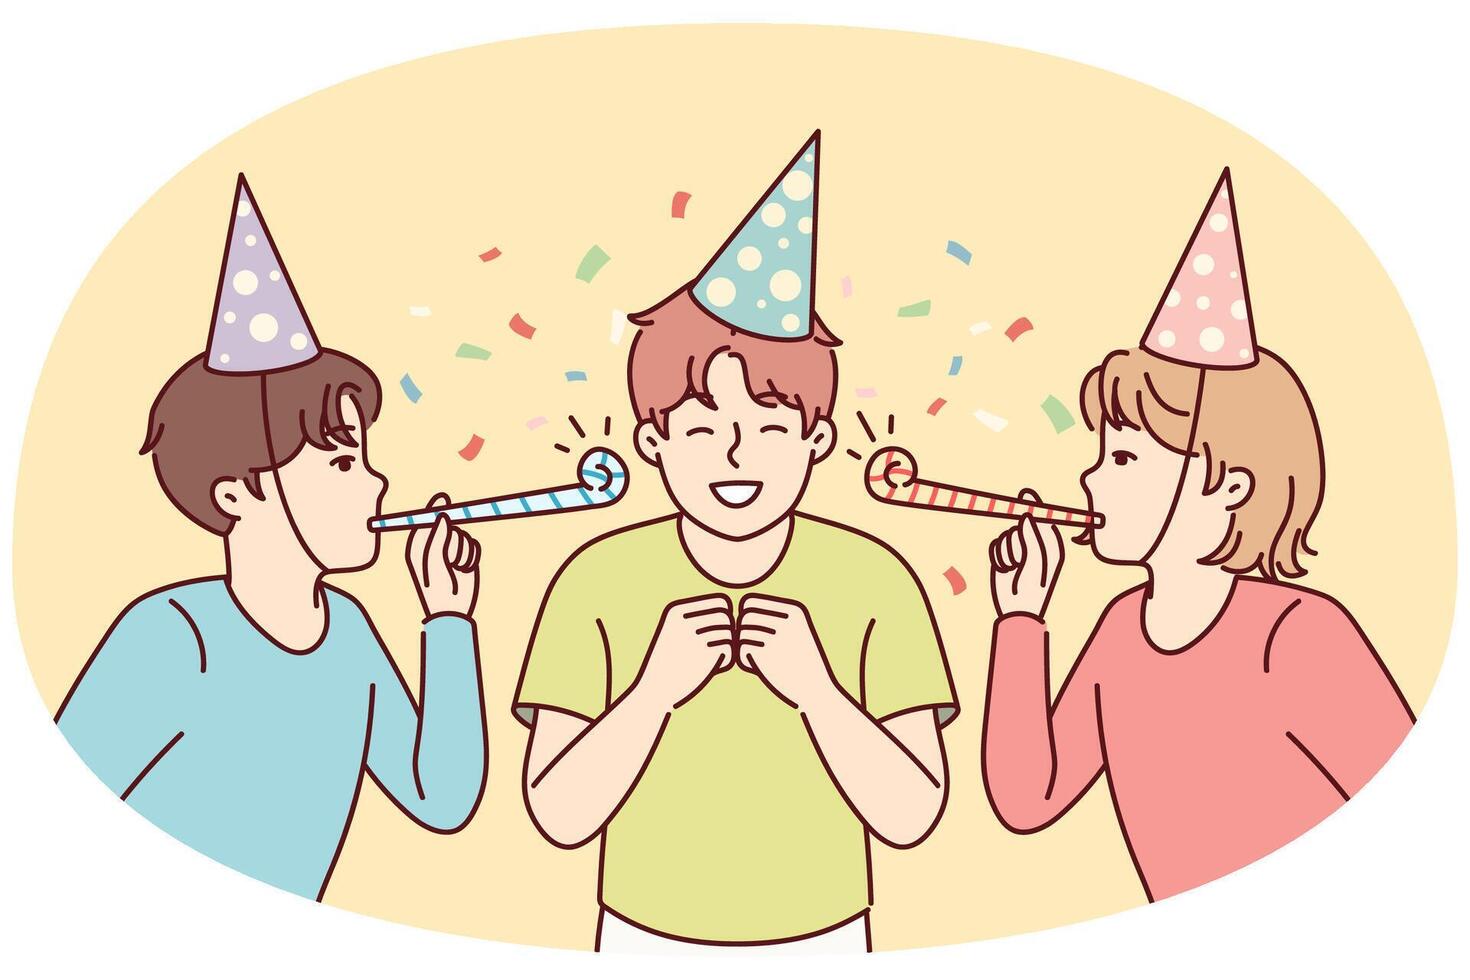 Teenage boy celebrating birthday with friends from school standing among confetti. Vector image